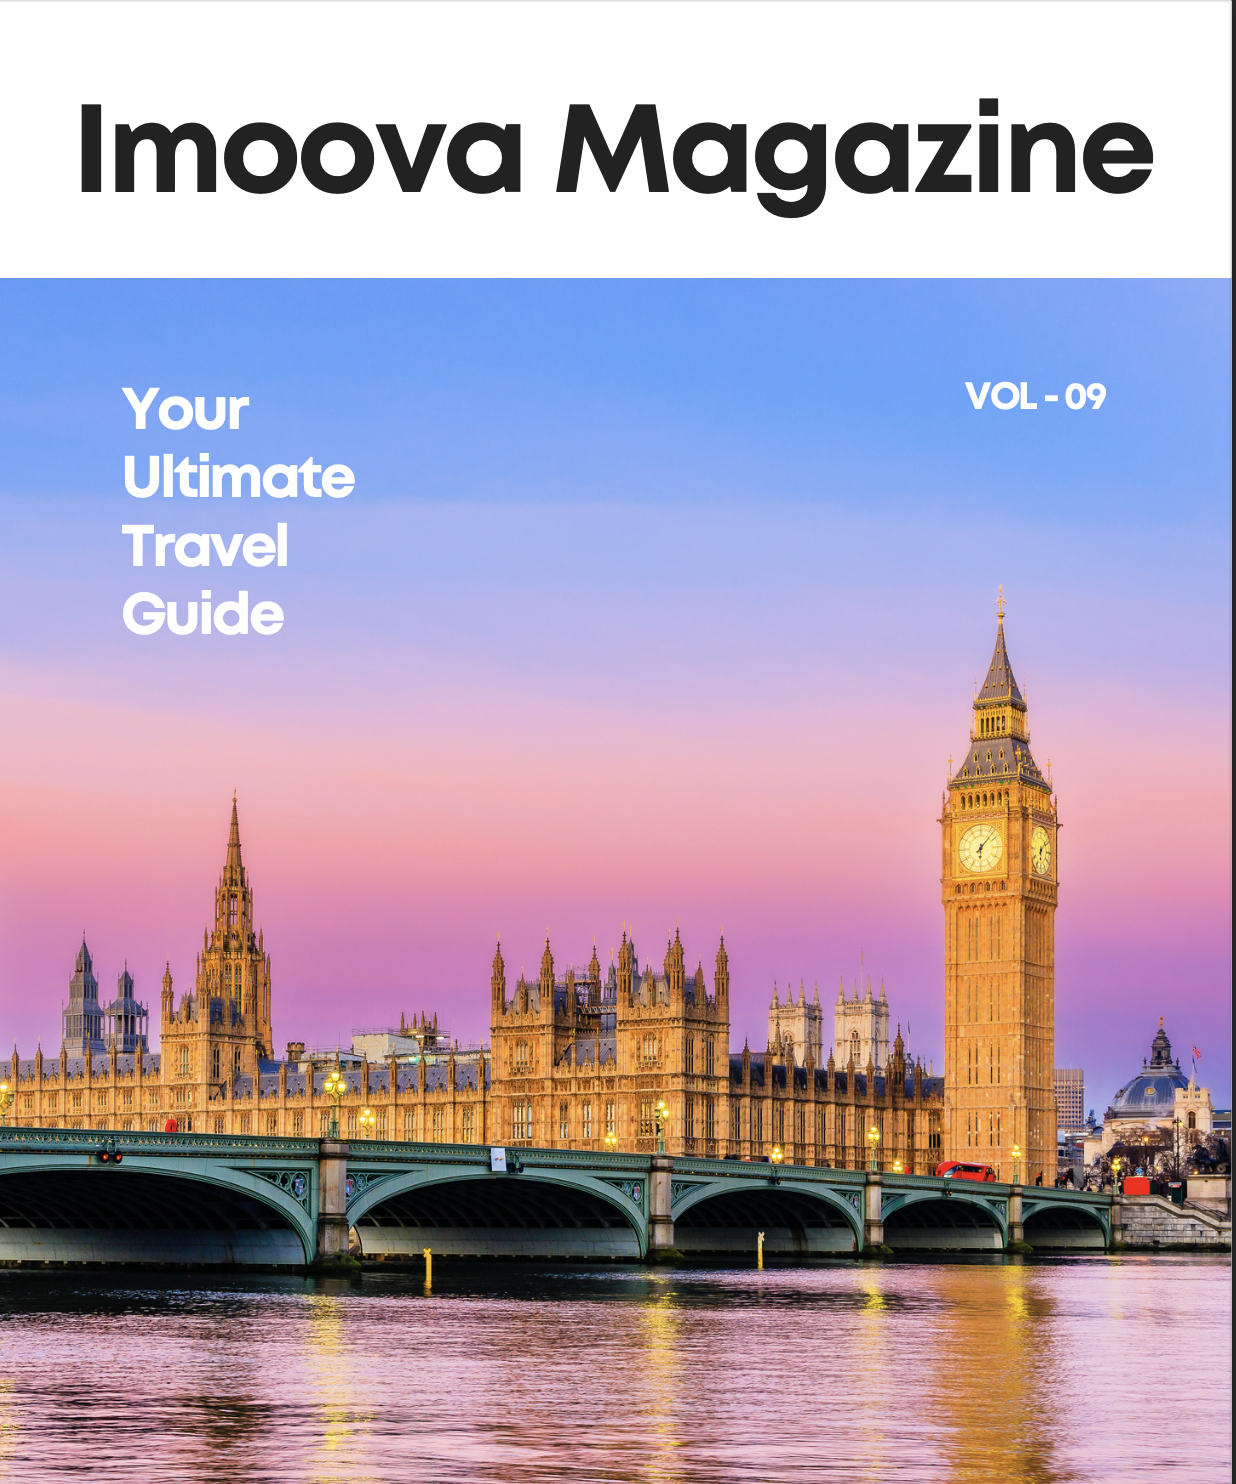 Magazine Issue 9 - Discover London